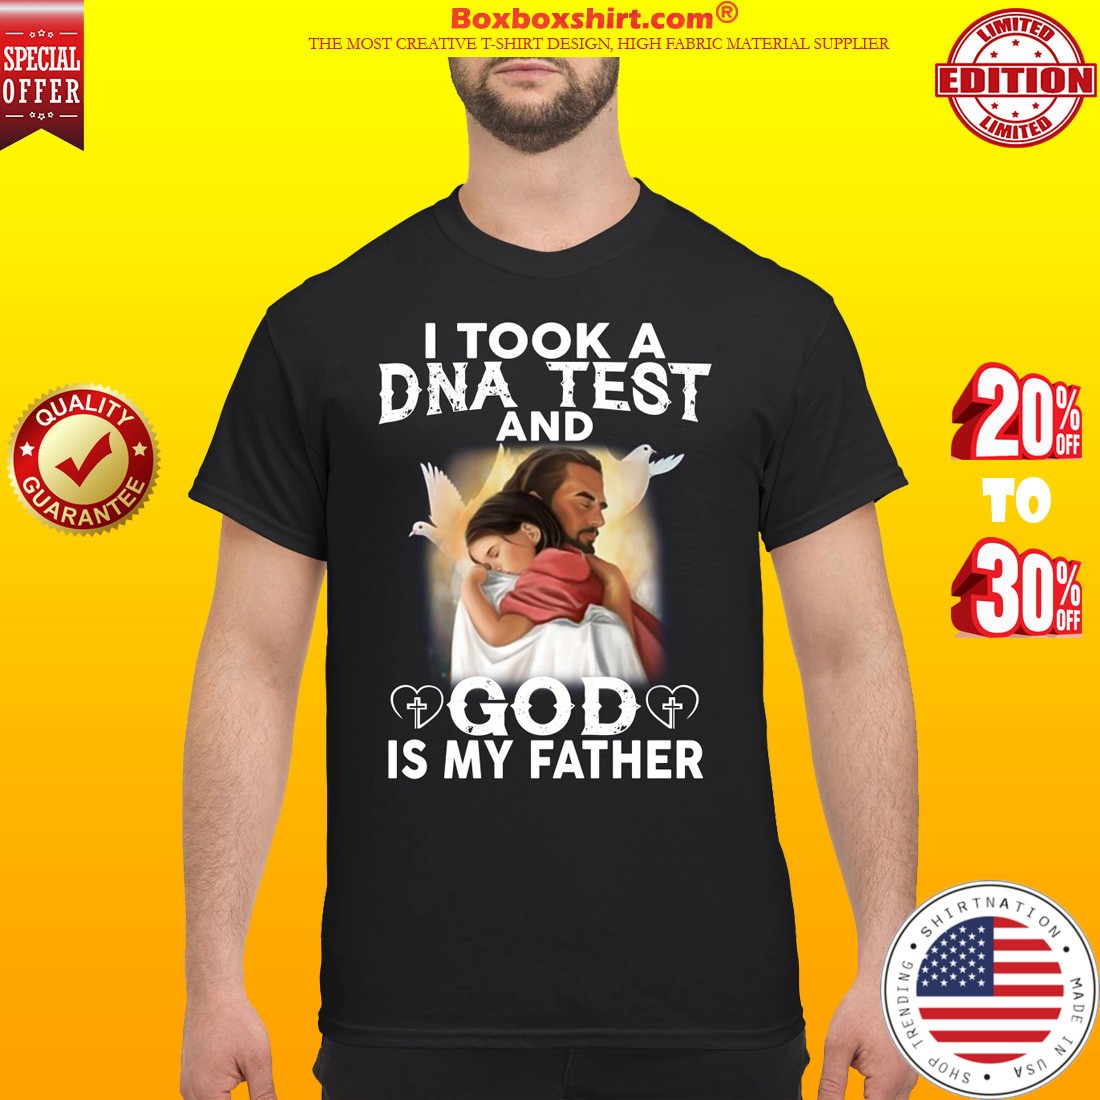 I took a DNA test and God is my father shirt